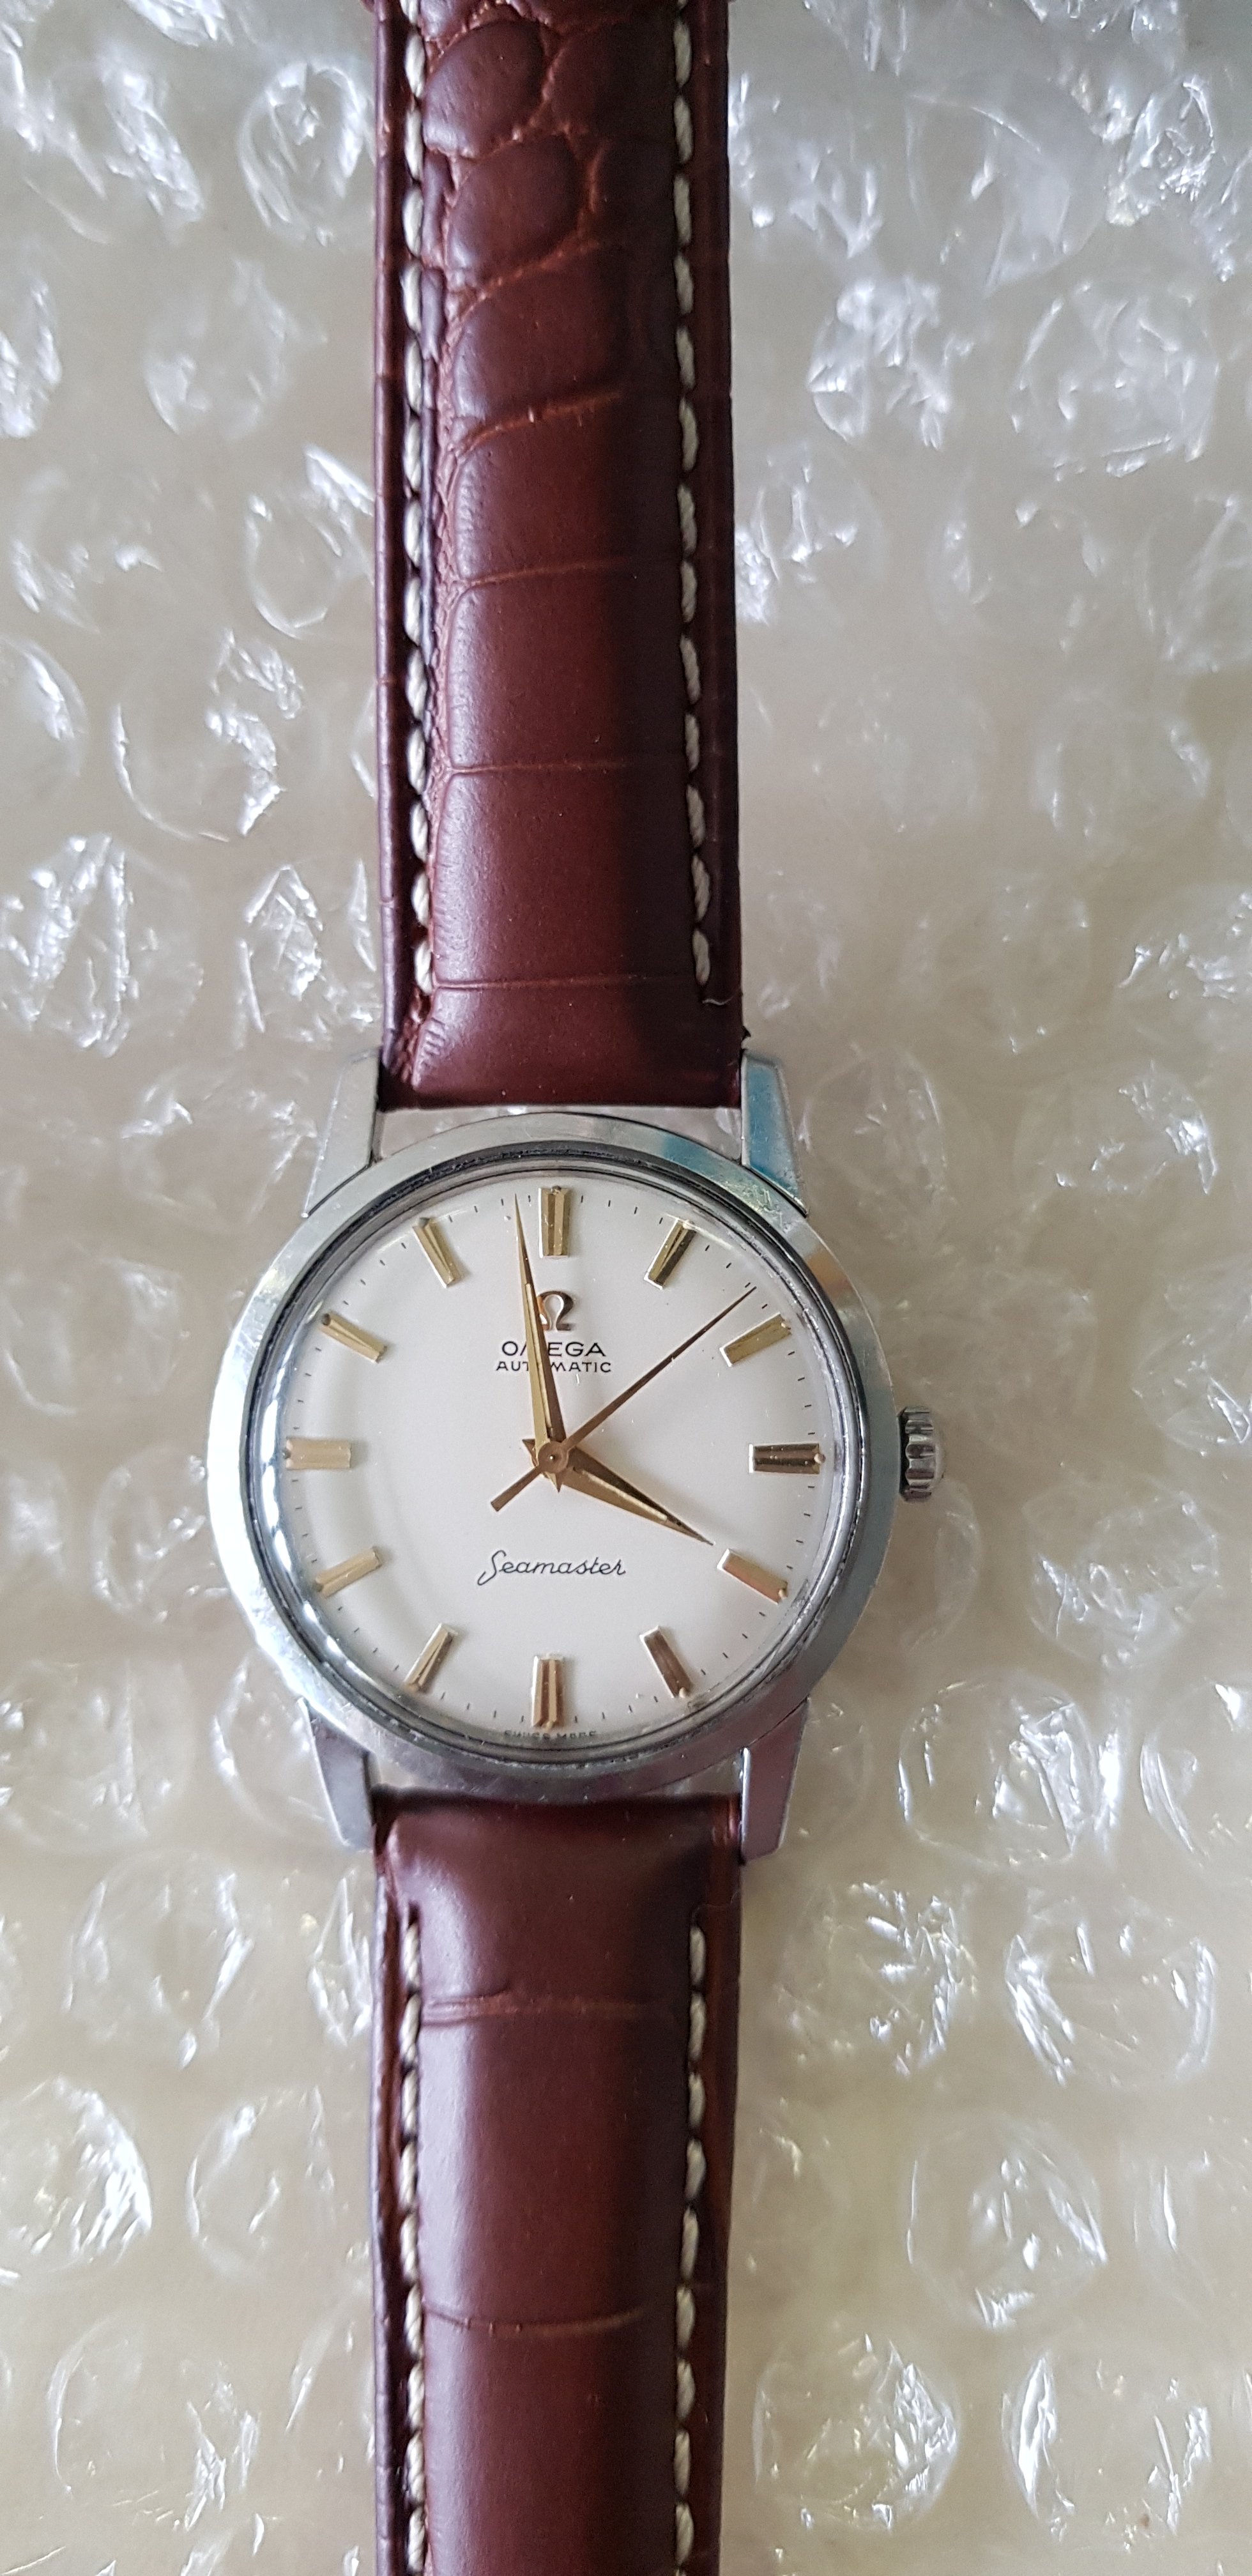 How do these watches have such clean markers and hands? | Omega Forums